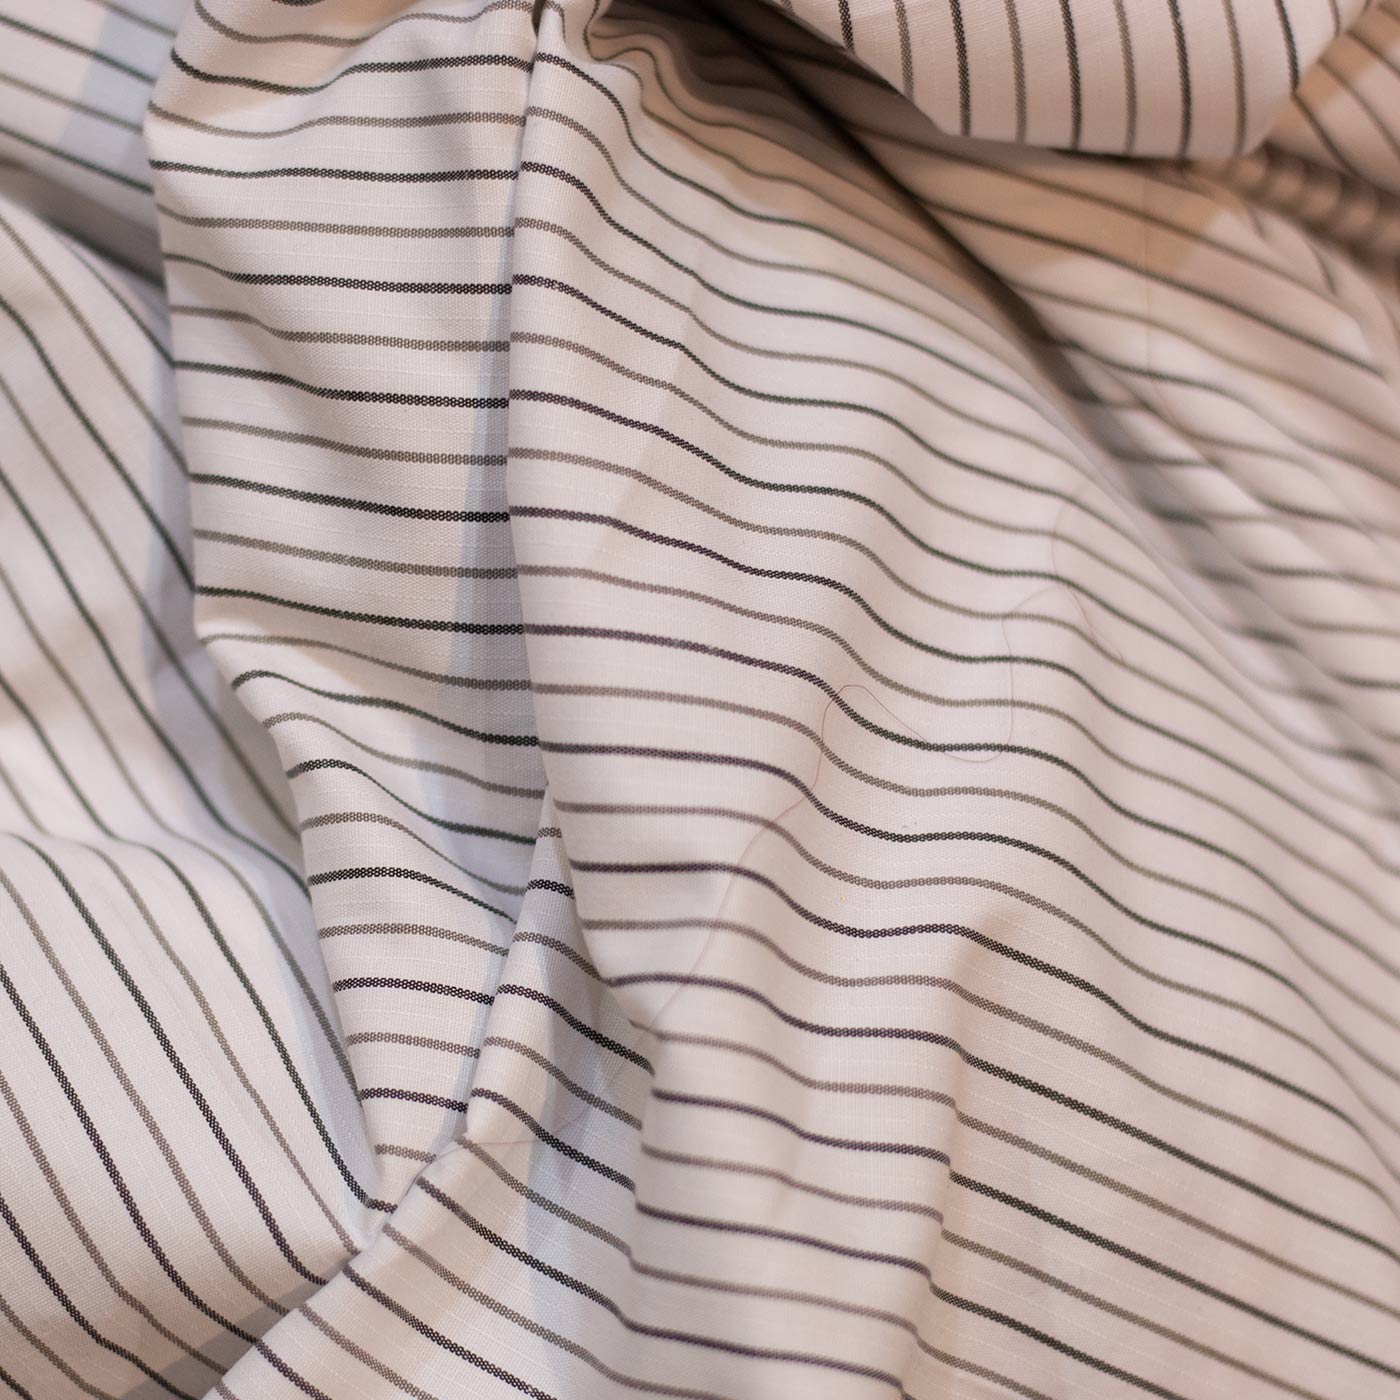 Black and Brown Striped Shirt Fabric